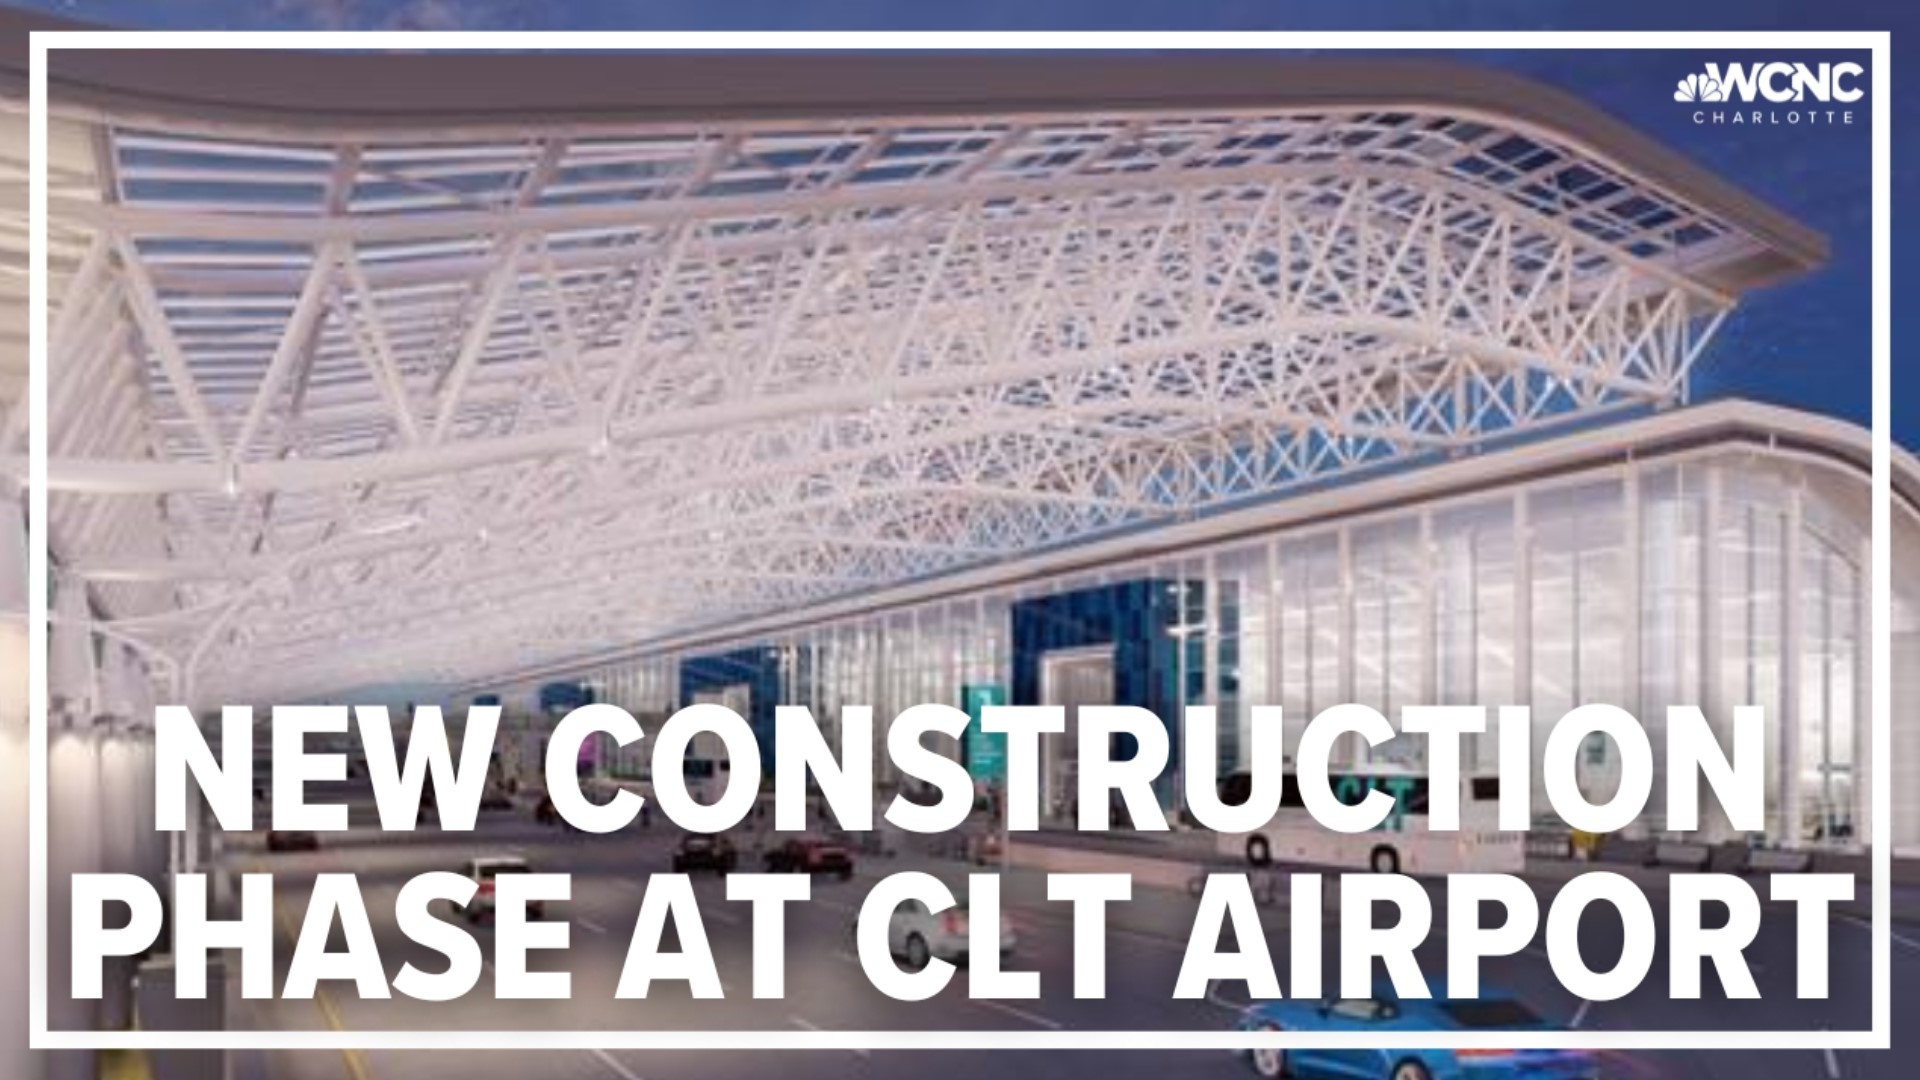 City leaders say renovating and expanding the airport is needed to accommodate the growth.